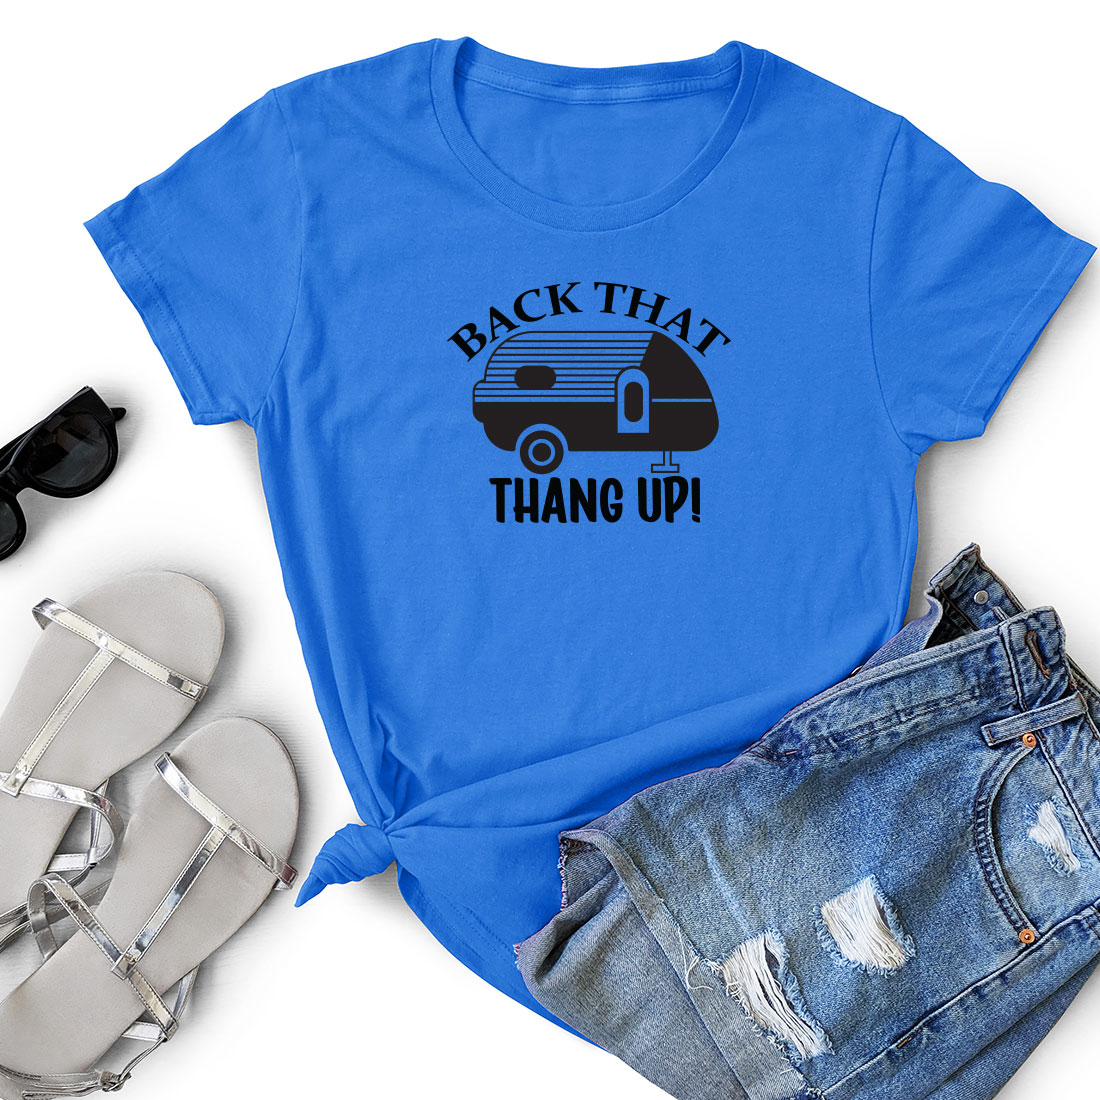 T - shirt that says back that thang up next to a pair of.